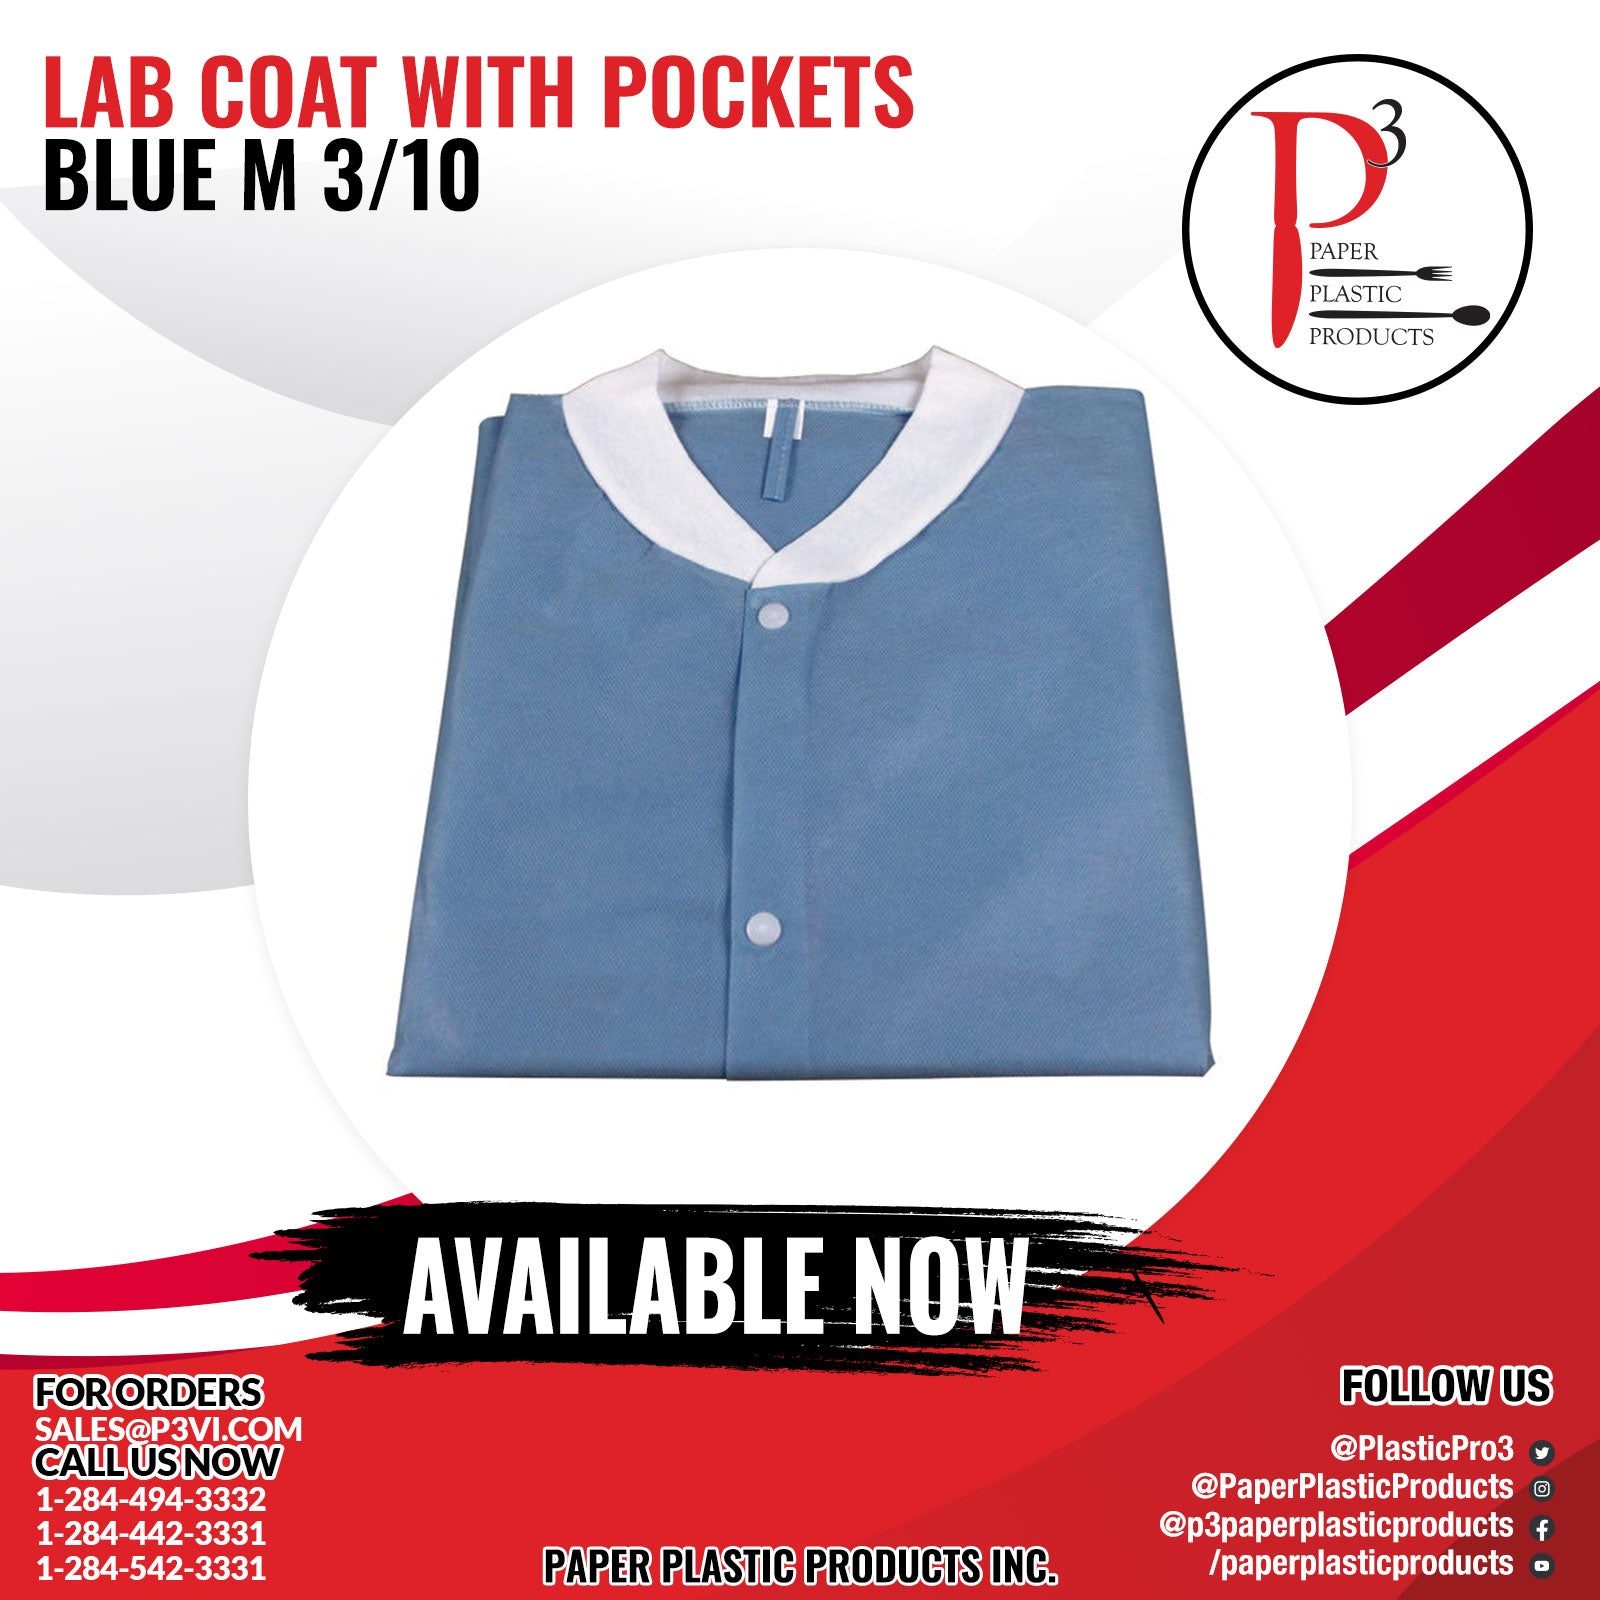 Lab Coat with Pockets Blue M 3/10